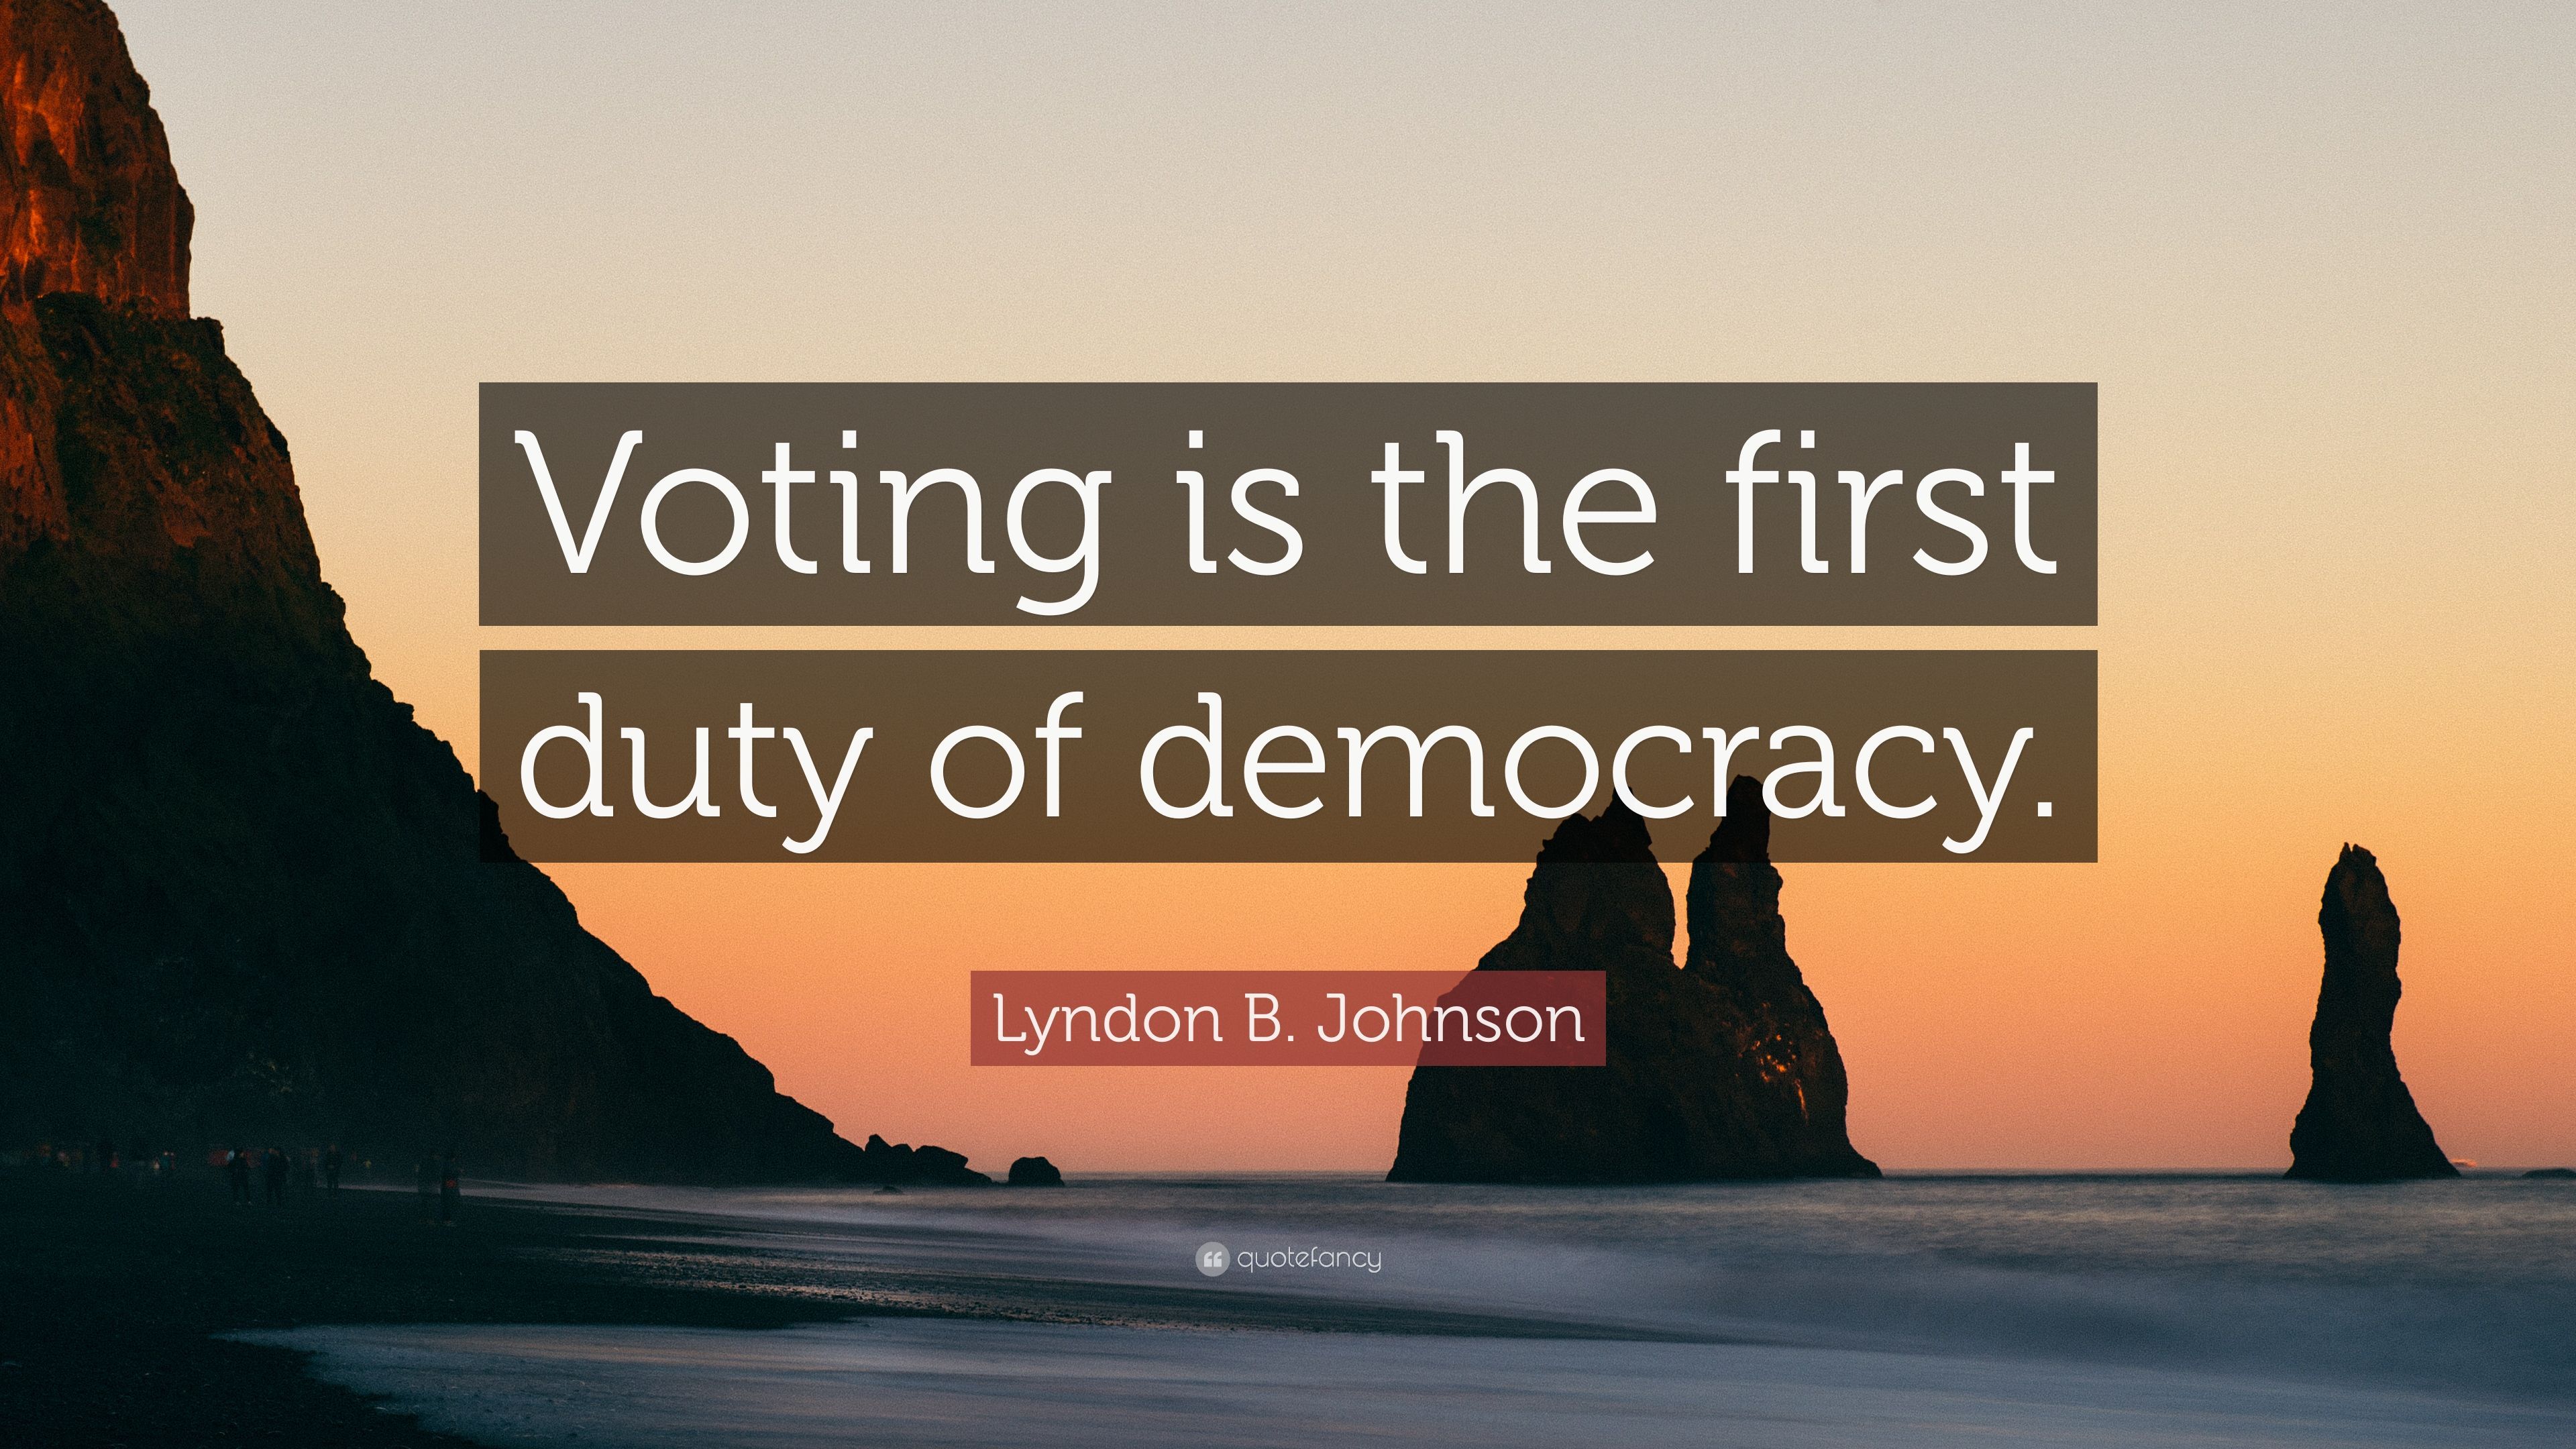 Lyndon B. Johnson Quote: “Voting is the first duty of democracy.” (7 wallpaper)